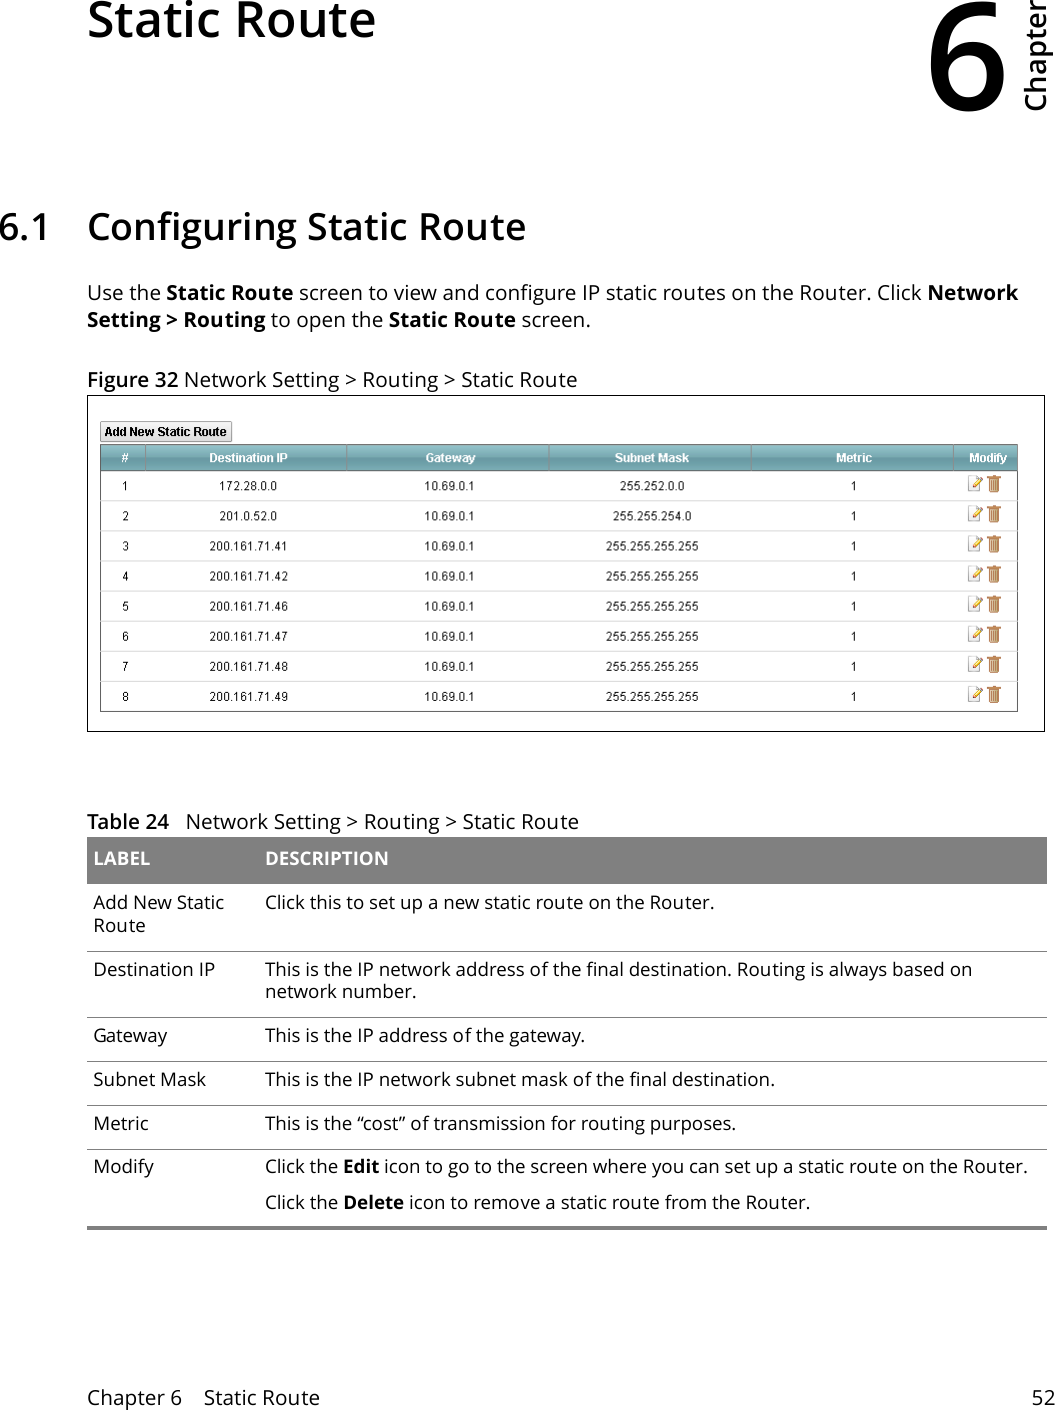 6Chapter Chapter 6    Static Route 52CHAPTER 6 Chapter 6 Static Route6.1   Configuring Static Route Use the Static Route screen to view and configure IP static routes on the Router. Click Network Setting &gt; Routing to open the Static Route screen. Figure 32 Network Setting &gt; Routing &gt; Static Route Table 24   Network Setting &gt; Routing &gt; Static Route LABEL DESCRIPTIONAdd New Static RouteClick this to set up a new static route on the Router.Destination IP This is the IP network address of the final destination. Routing is always based on network number. Gateway This is the IP address of the gateway. Subnet Mask This is the IP network subnet mask of the final destination.Metric This is the “cost” of transmission for routing purposes.Modify Click the Edit icon to go to the screen where you can set up a static route on the Router.Click the Delete icon to remove a static route from the Router. 